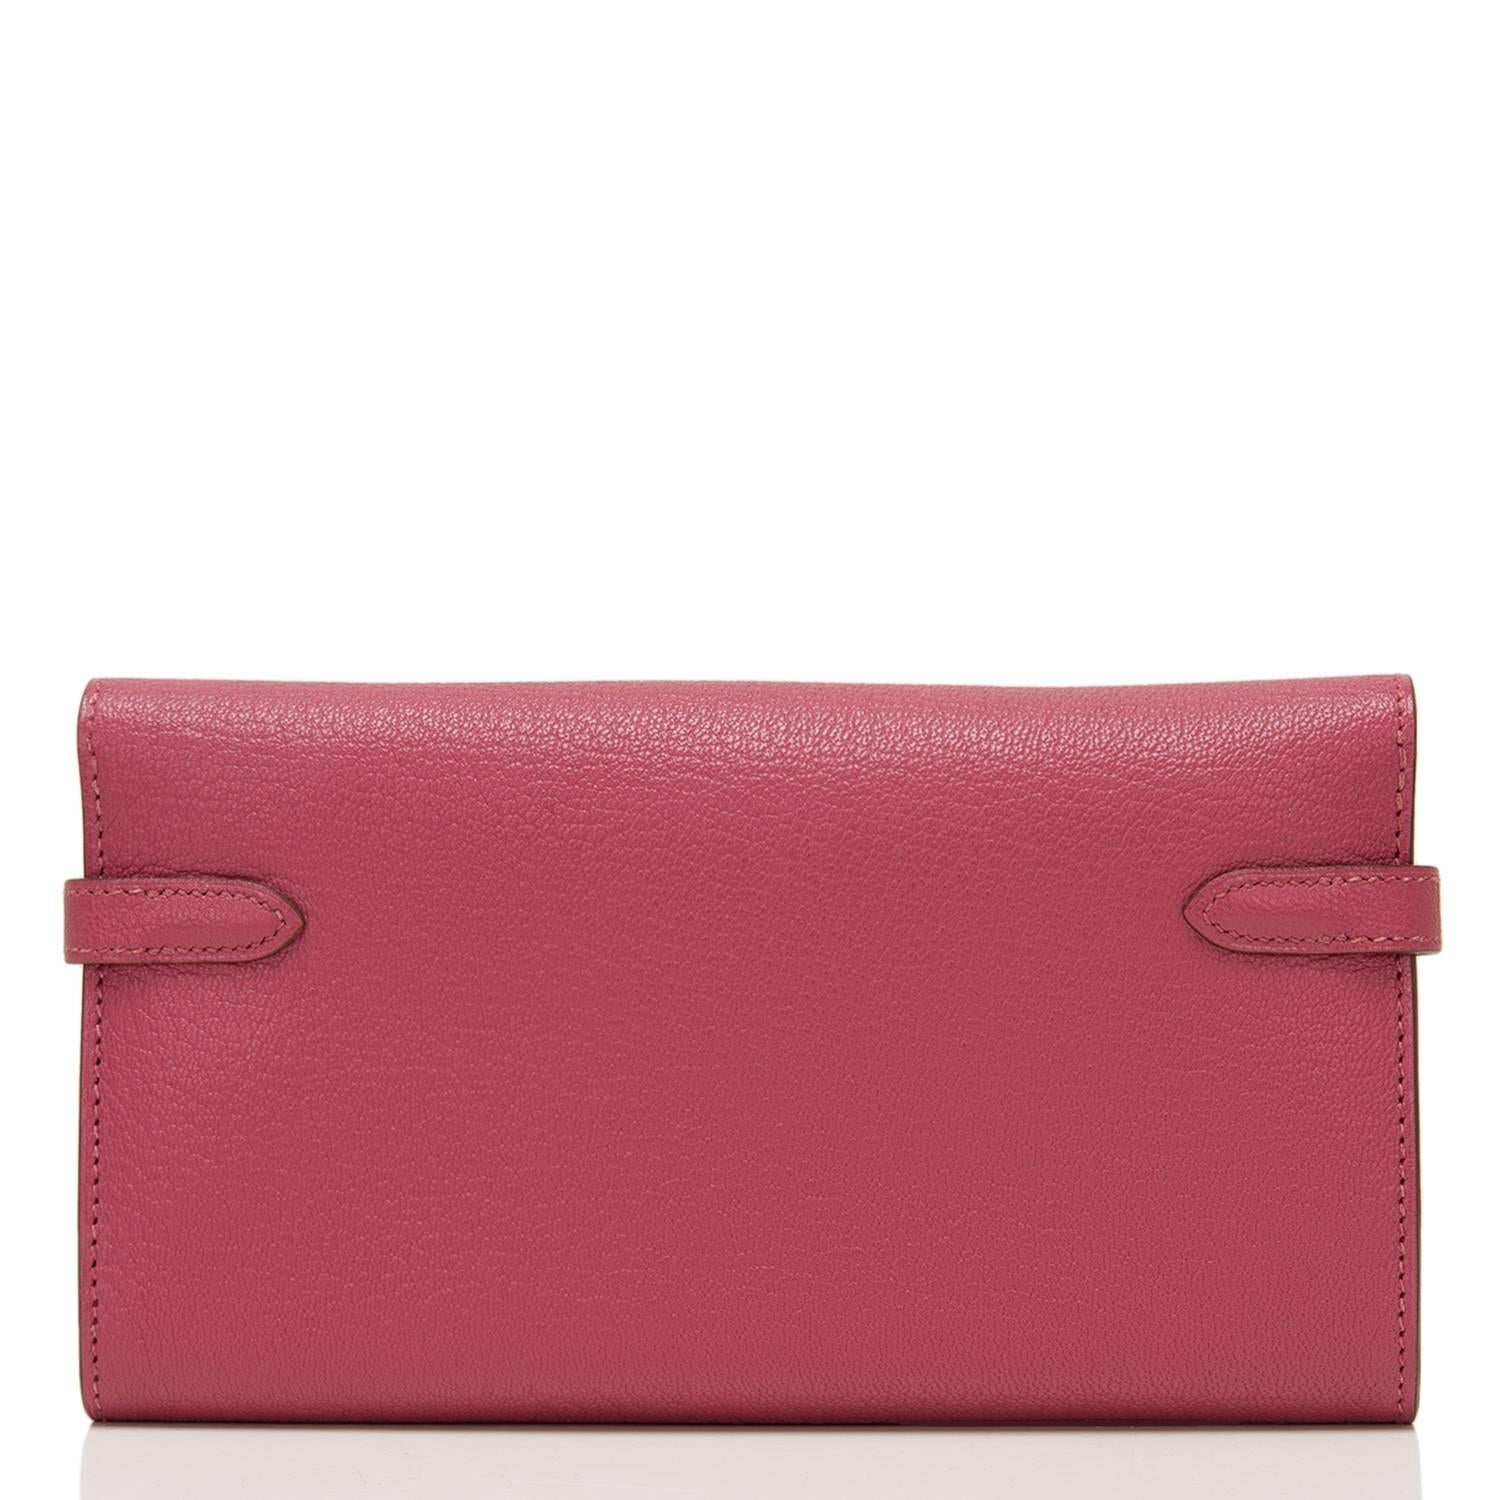 Hermes Bois de Rose Chevre Kelly Long Wallet In New Condition For Sale In New York, NY